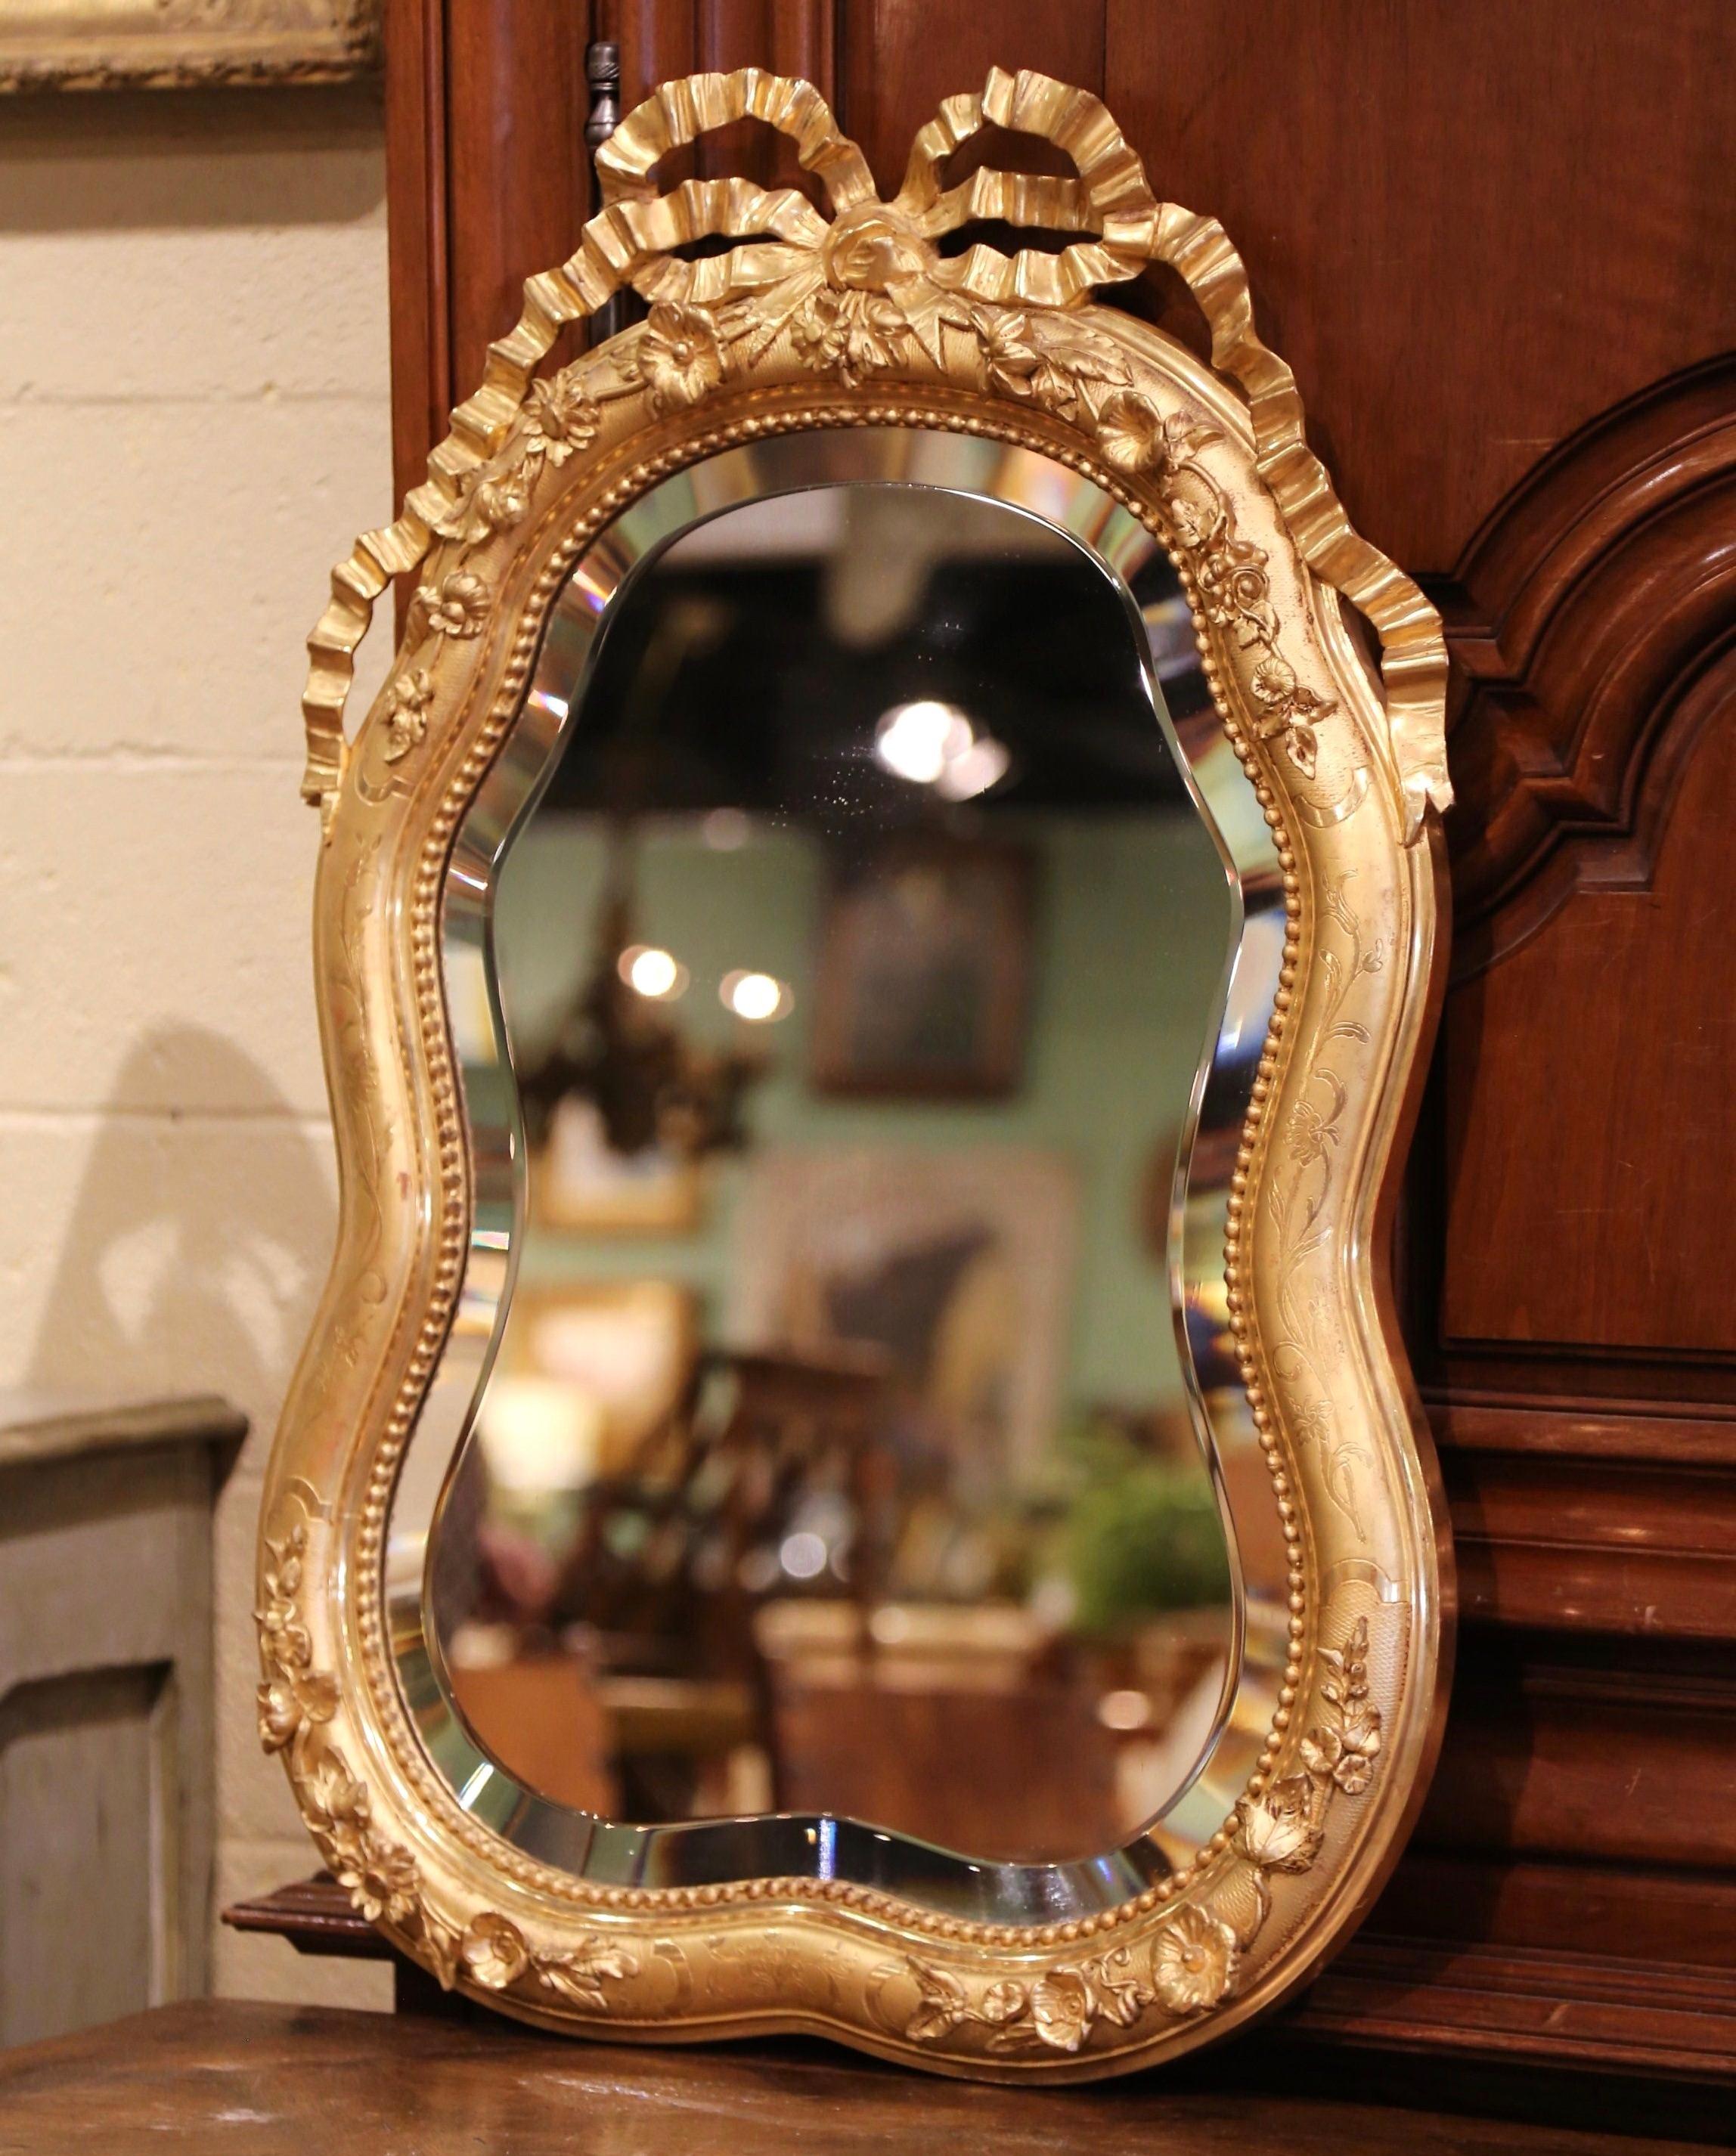 This antique mirror was crafted in Paris, France, circa 1880. Scalloped in shape, the elegant wall hanging mirror features the traditional carved Louis XVI ribbon bow at the pediment with flowers in high relief and engraved floral decor around the